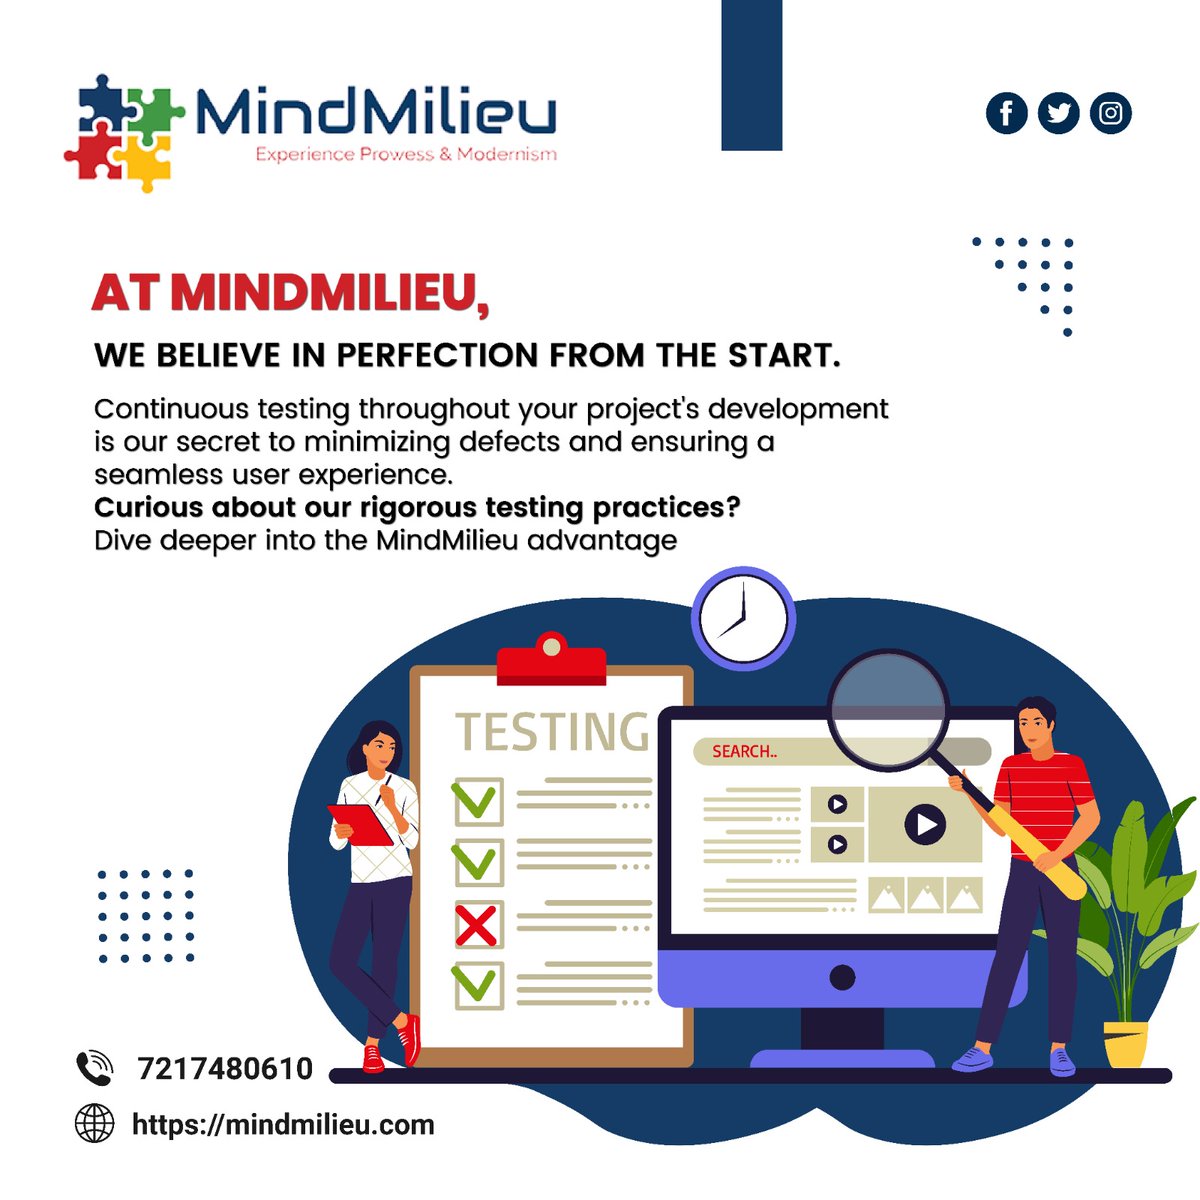 🔍 MindMilieu advantage: Our continuous testing ensures your project's perfection from start to finish. Experience seamless user journeys and minimal defects.
.
.
 #QualityAssurance #TestingProtocols #FlawlessExecution #TechInnovation #CustomerSatisfaction #SeamlessPerfection